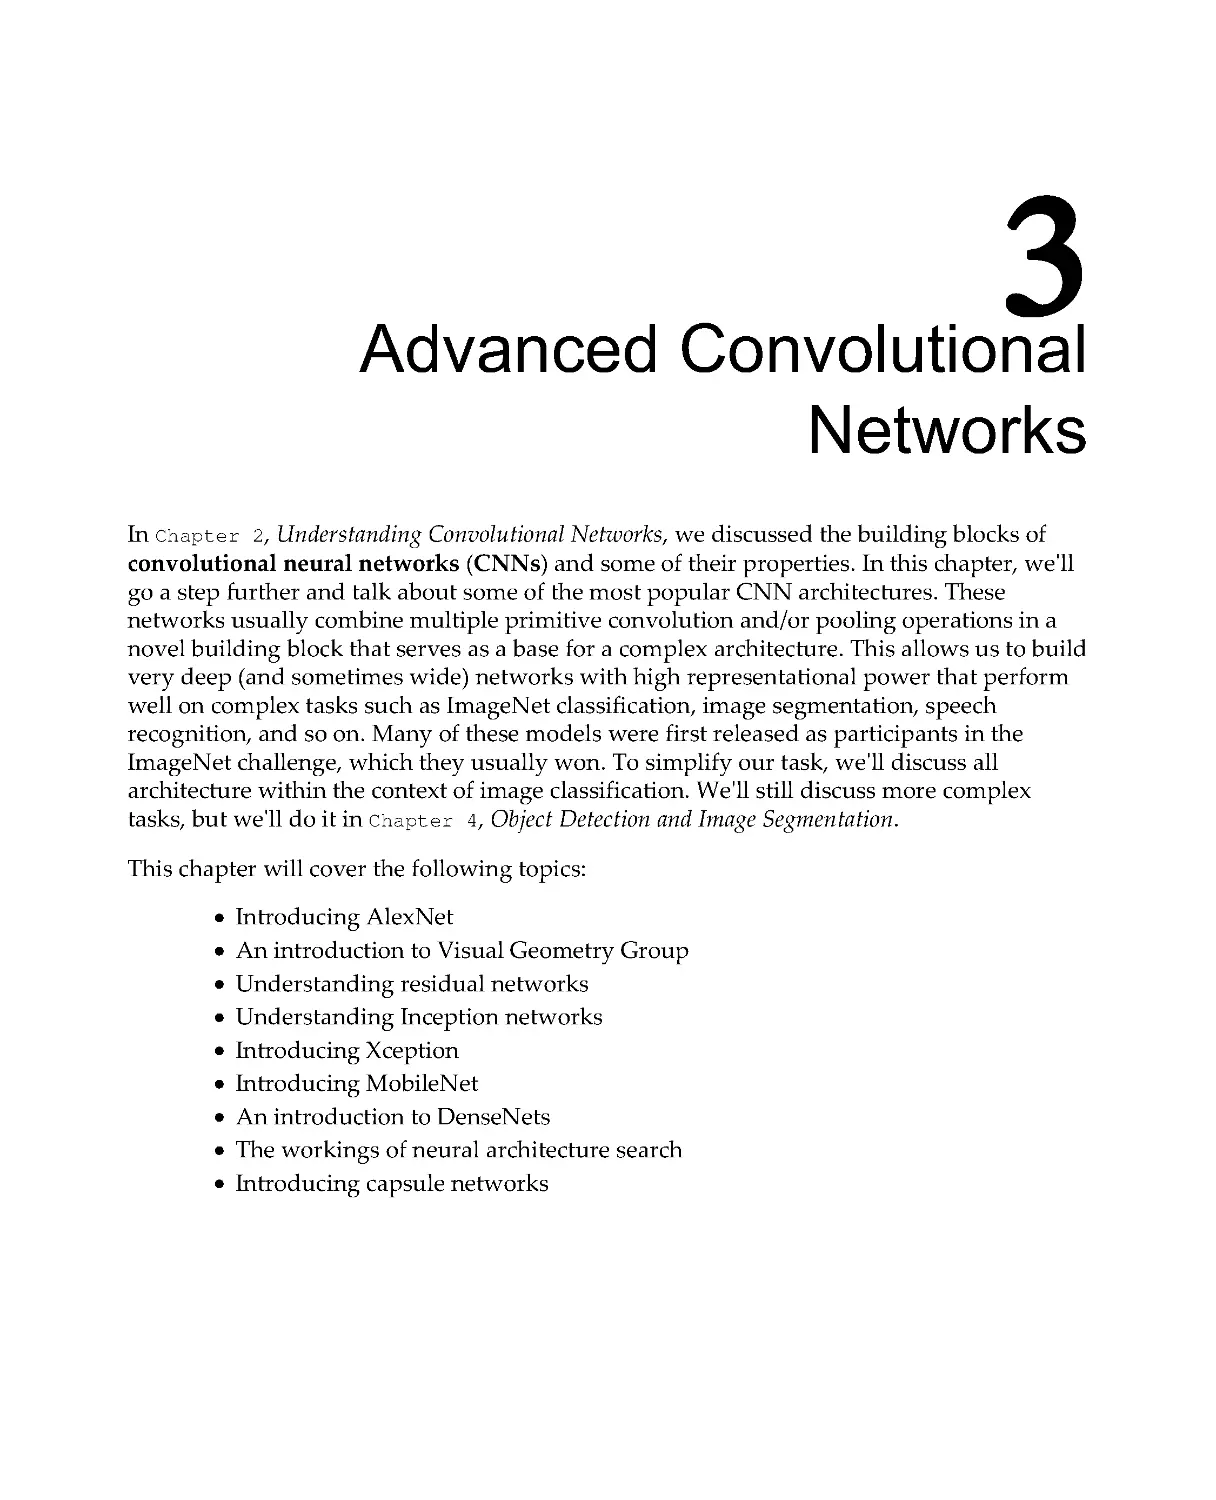 Chapter 3: Advanced Convolutional Networks